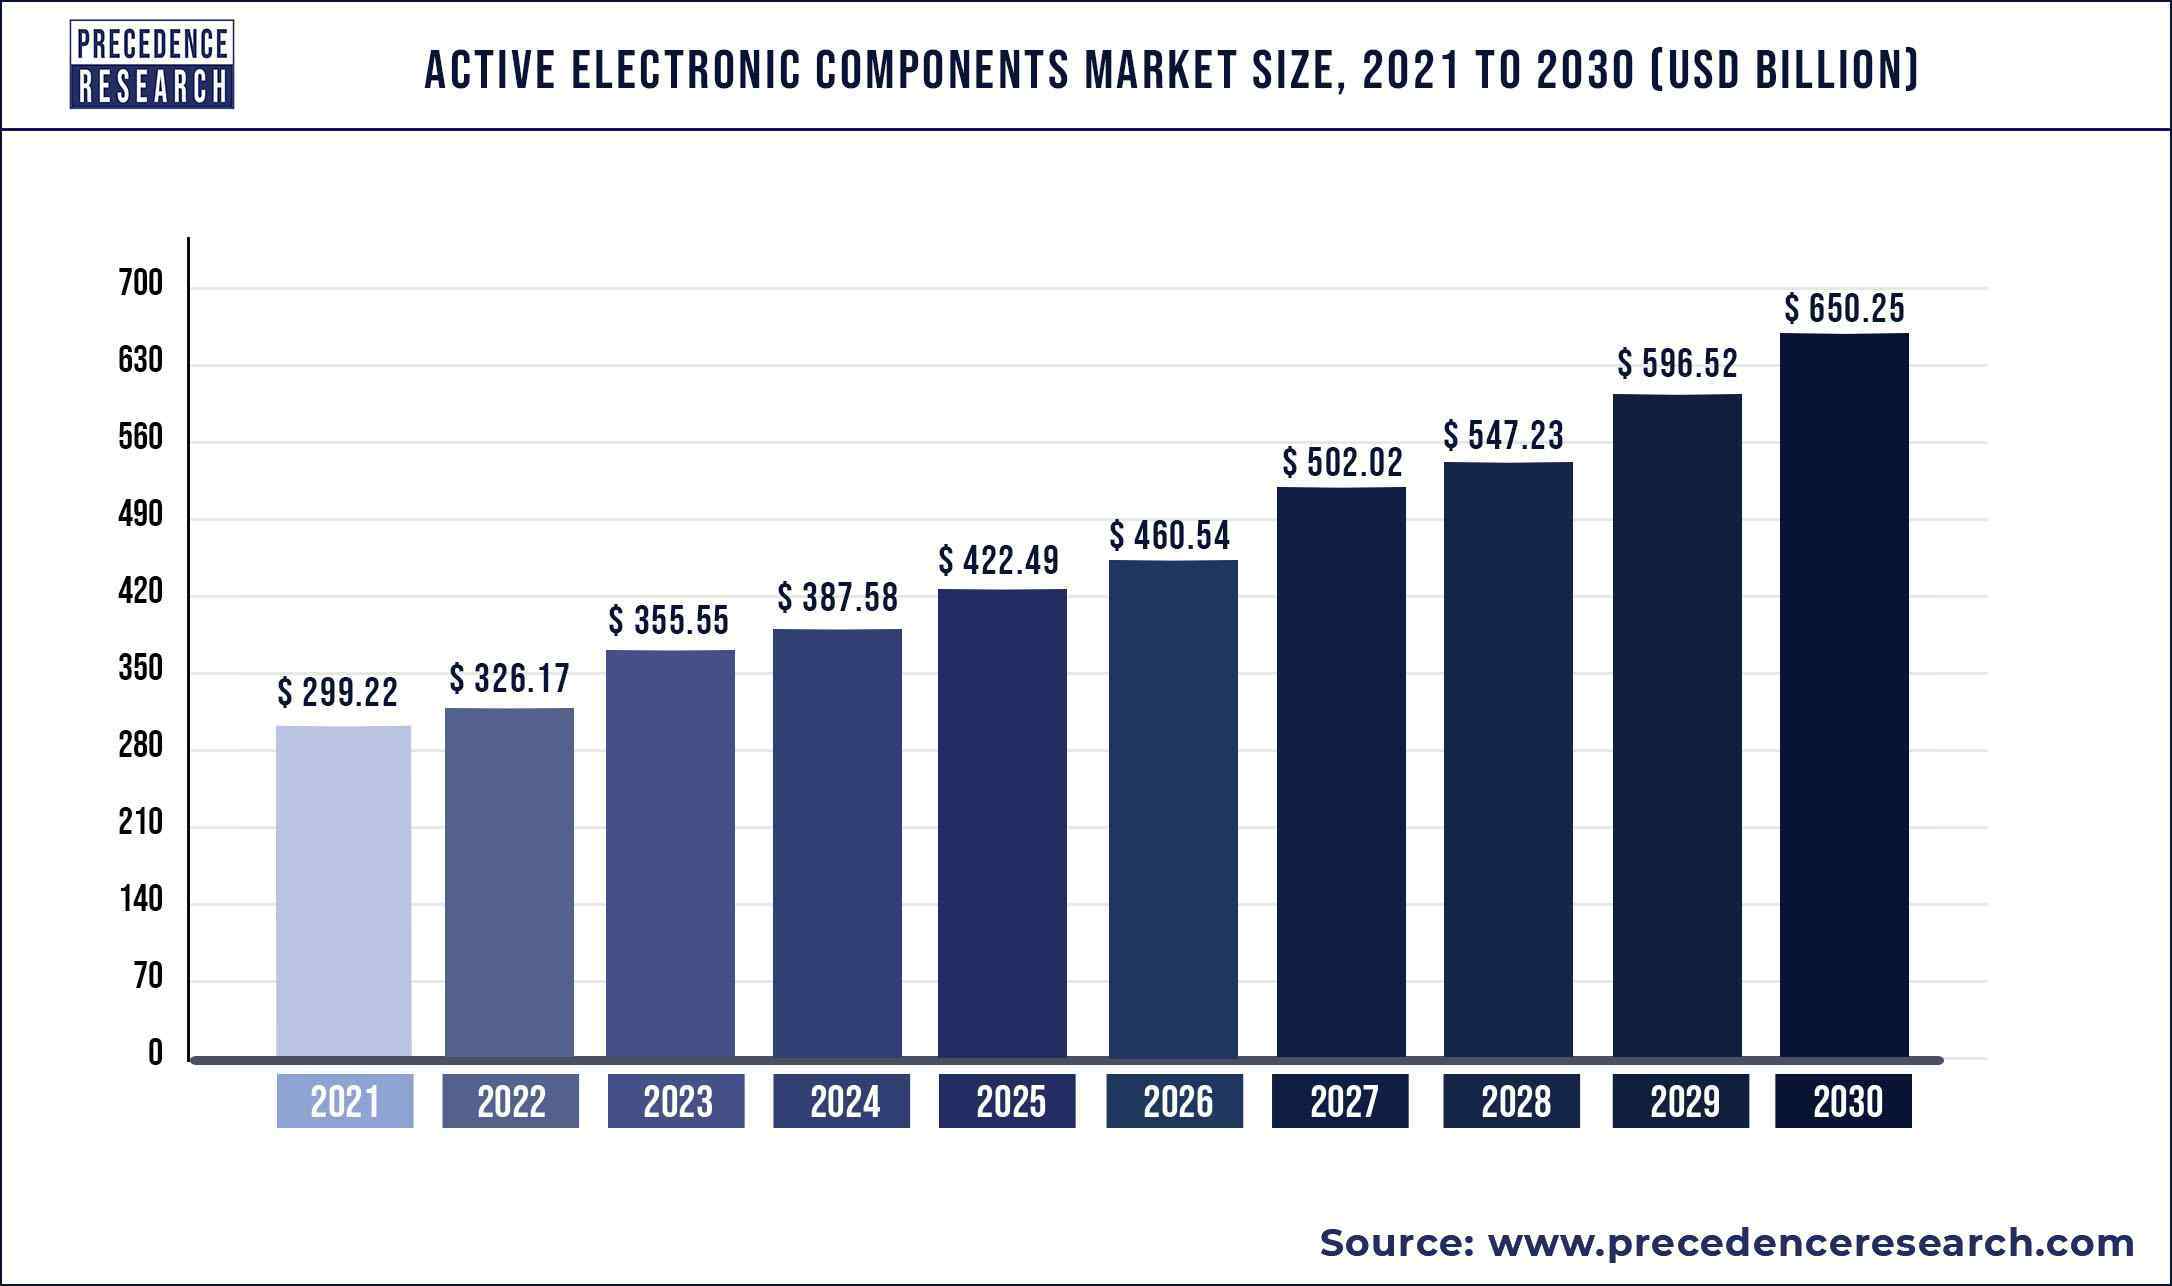 Active Electronic Components Market Size 2021 to 2030